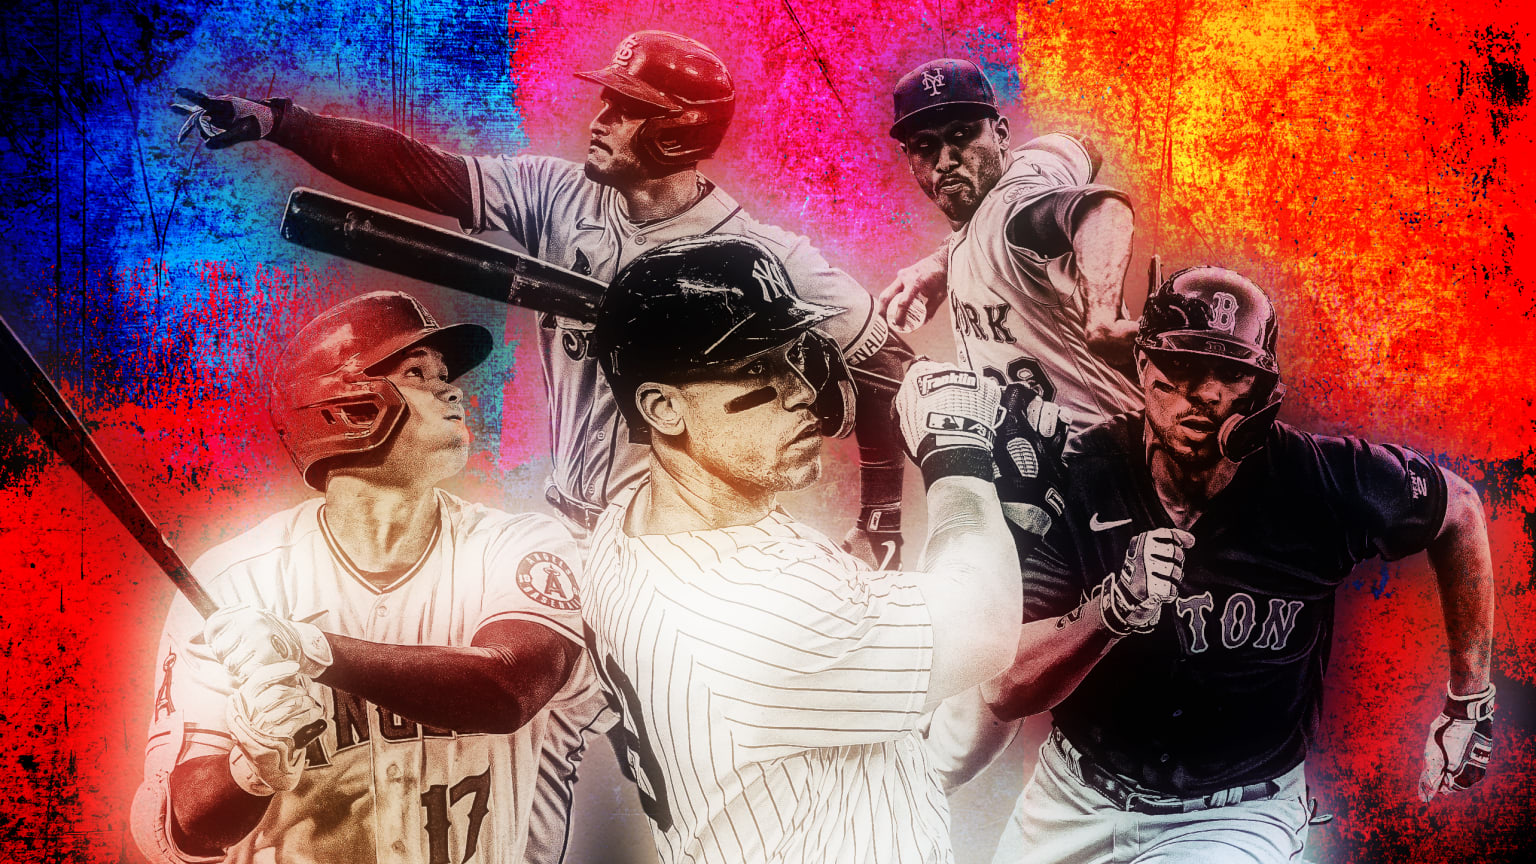 Shohei Ohtani, Aaron Judge, Xander Bogaerts, Edwin Diaz and Nolan Arenado clustered over a bright, multicolored background reminiscent of paint